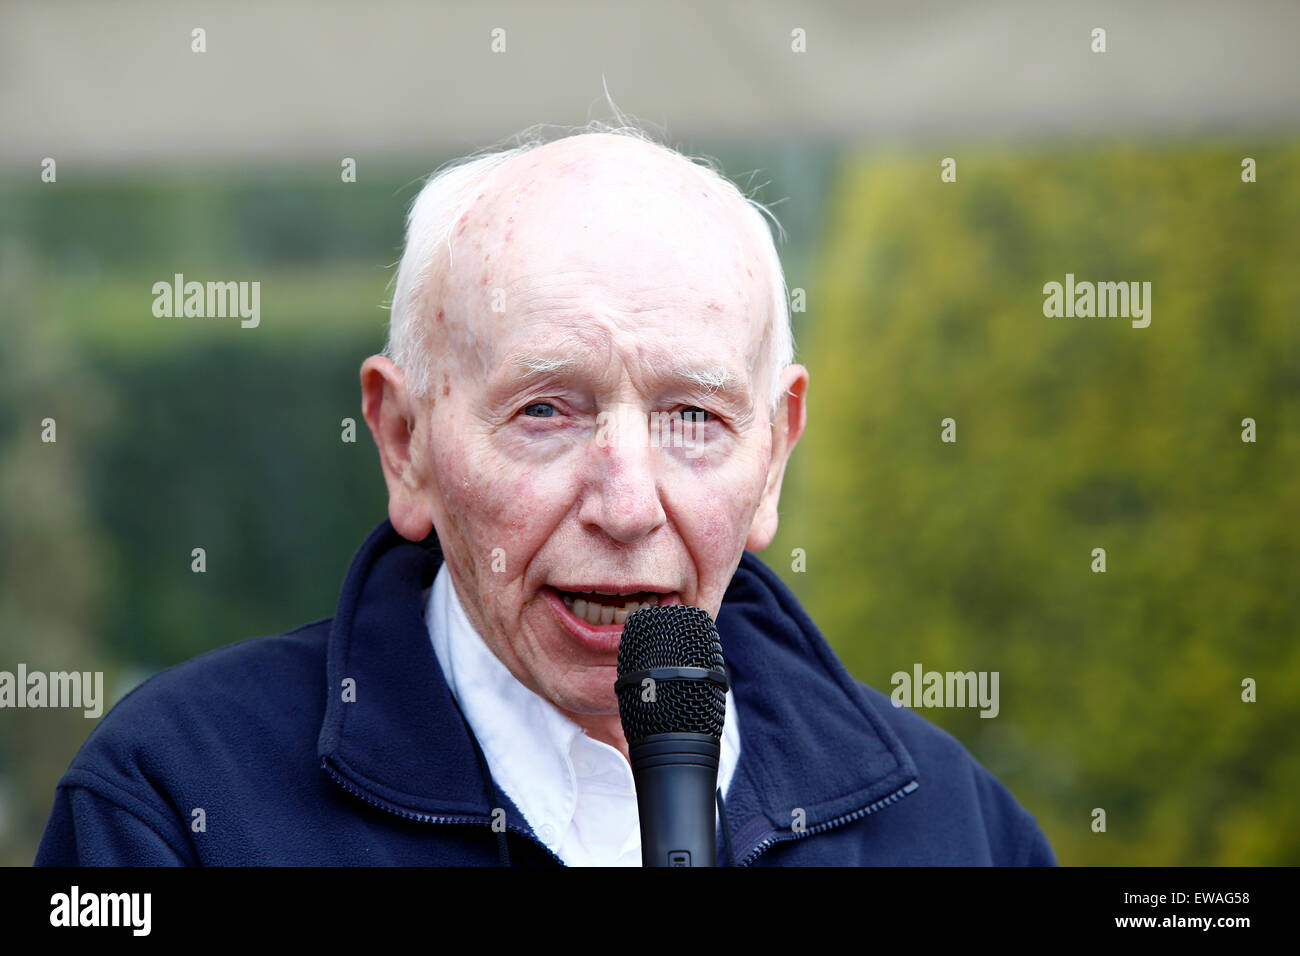 Hever Castle, Kent, UK. 21st June, 2015. Former double world champion John Surtees celebrates Father's Day at Hever Castle in Kent 21.06.2015 Credit:  theodore liasi/Alamy Live News Stock Photo